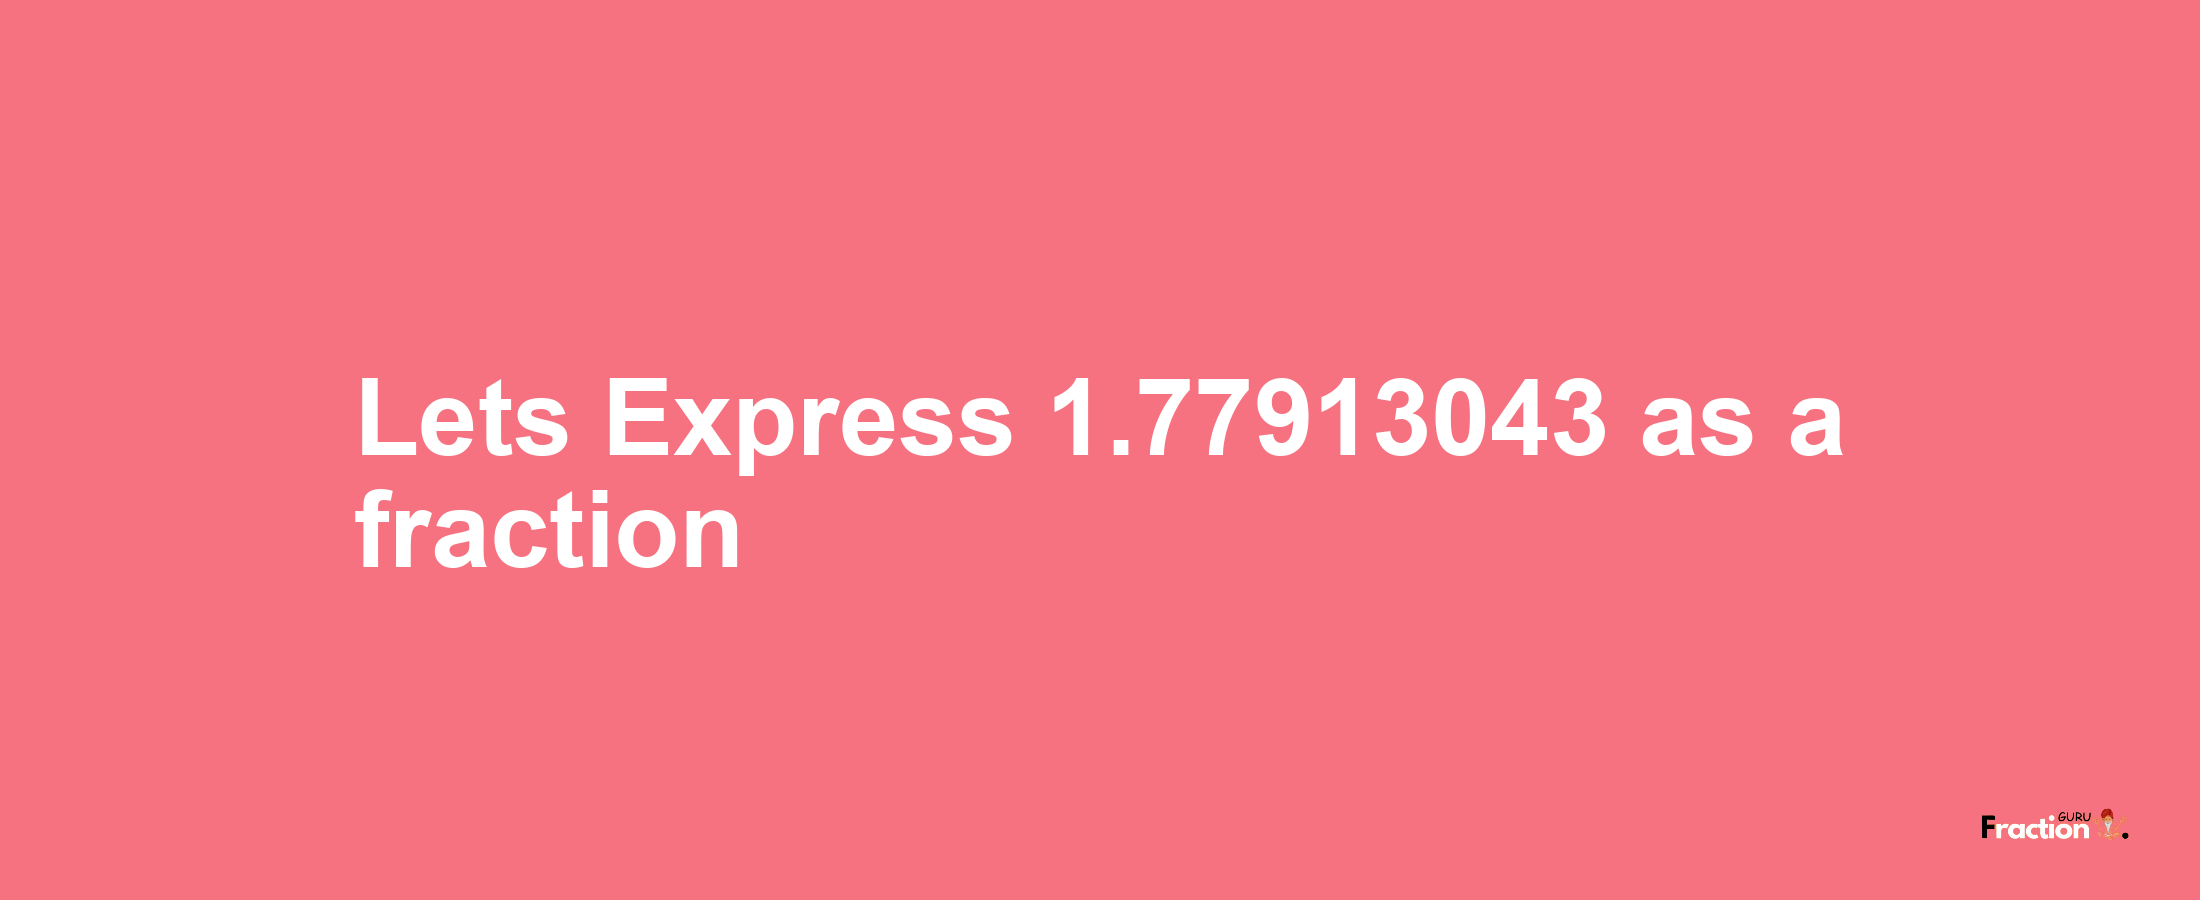 Lets Express 1.77913043 as afraction